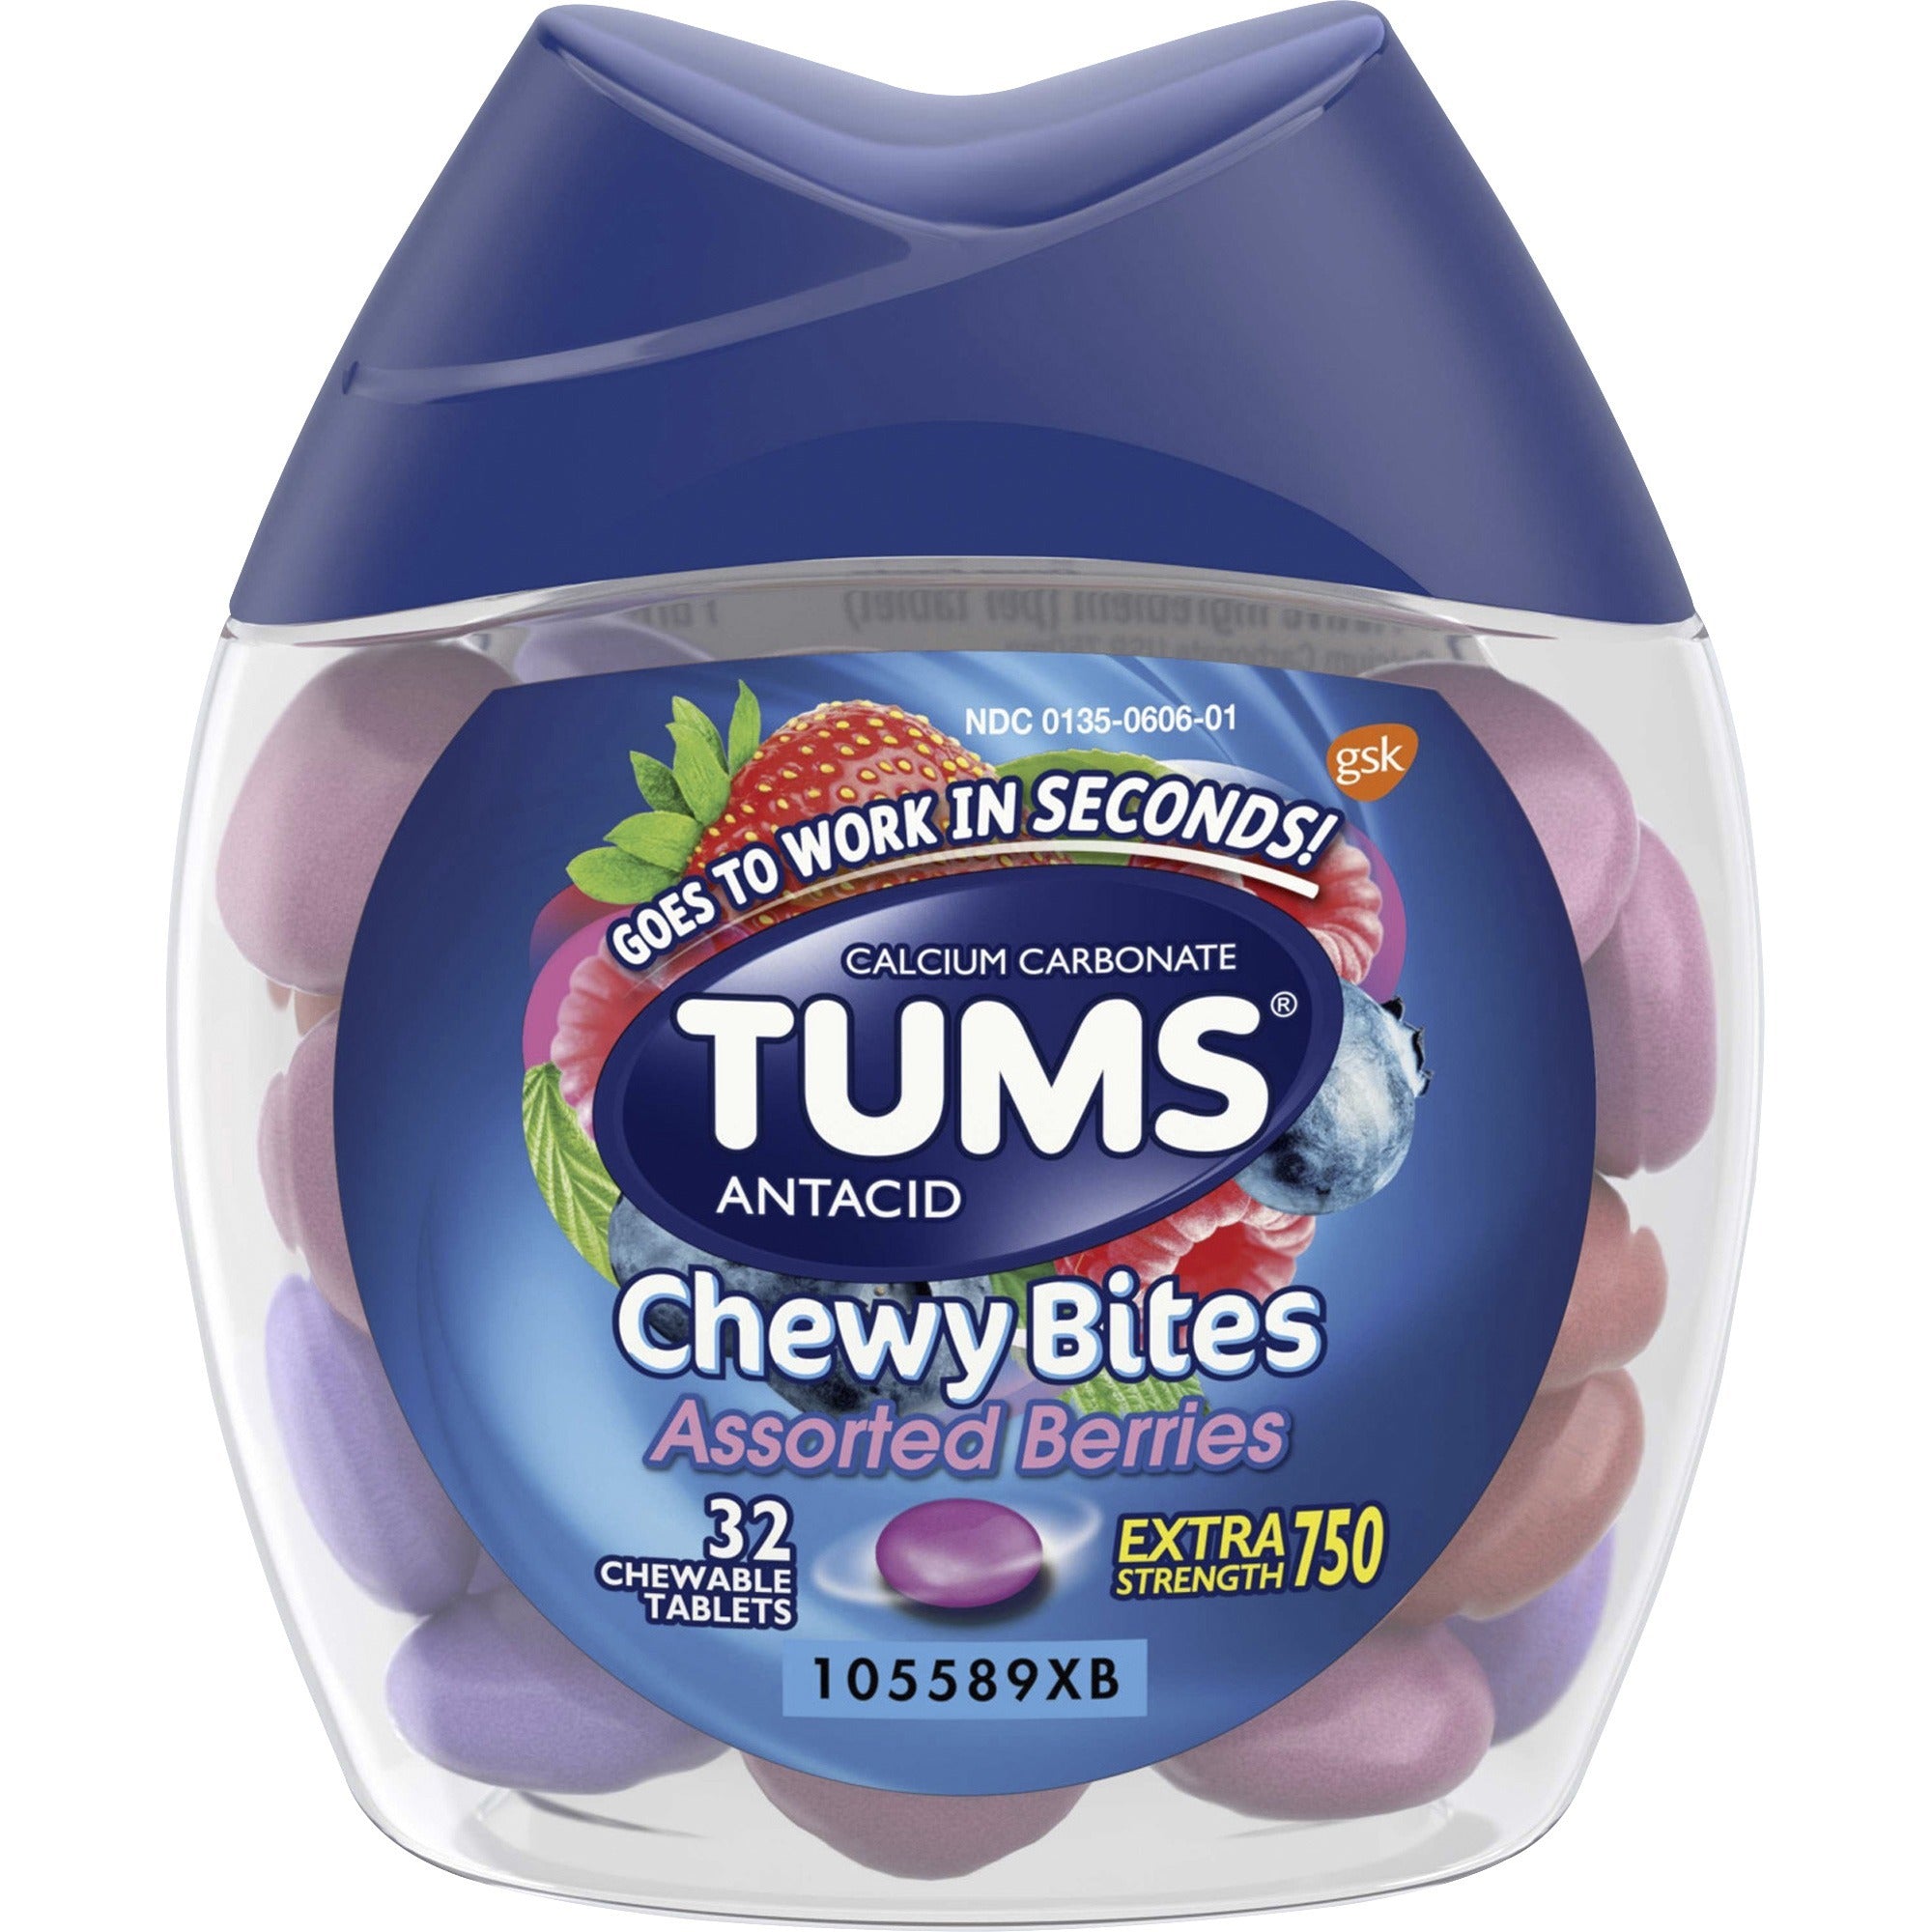 TUMS Chewy Bites Chewable Antacid Tablets - For Acid Indigestion, Heartburn, Sour Stomach, Upset Stomach - Assorted Berries - 1 EachBottle - 1